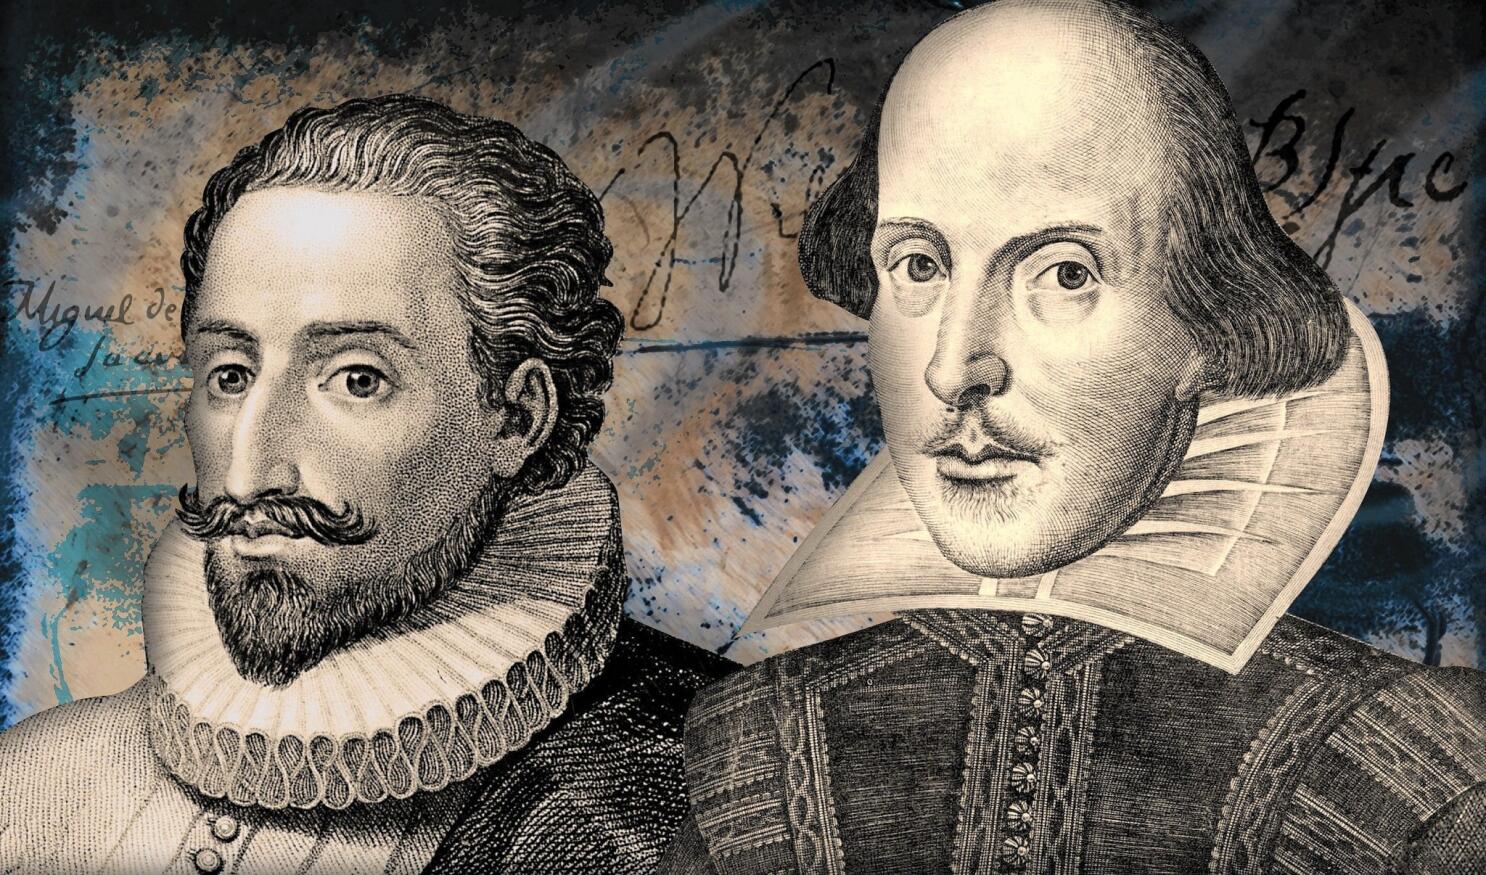 Shakespeare and Cervantes: what similarities between the famous writers  reveal about mysteries of authorship